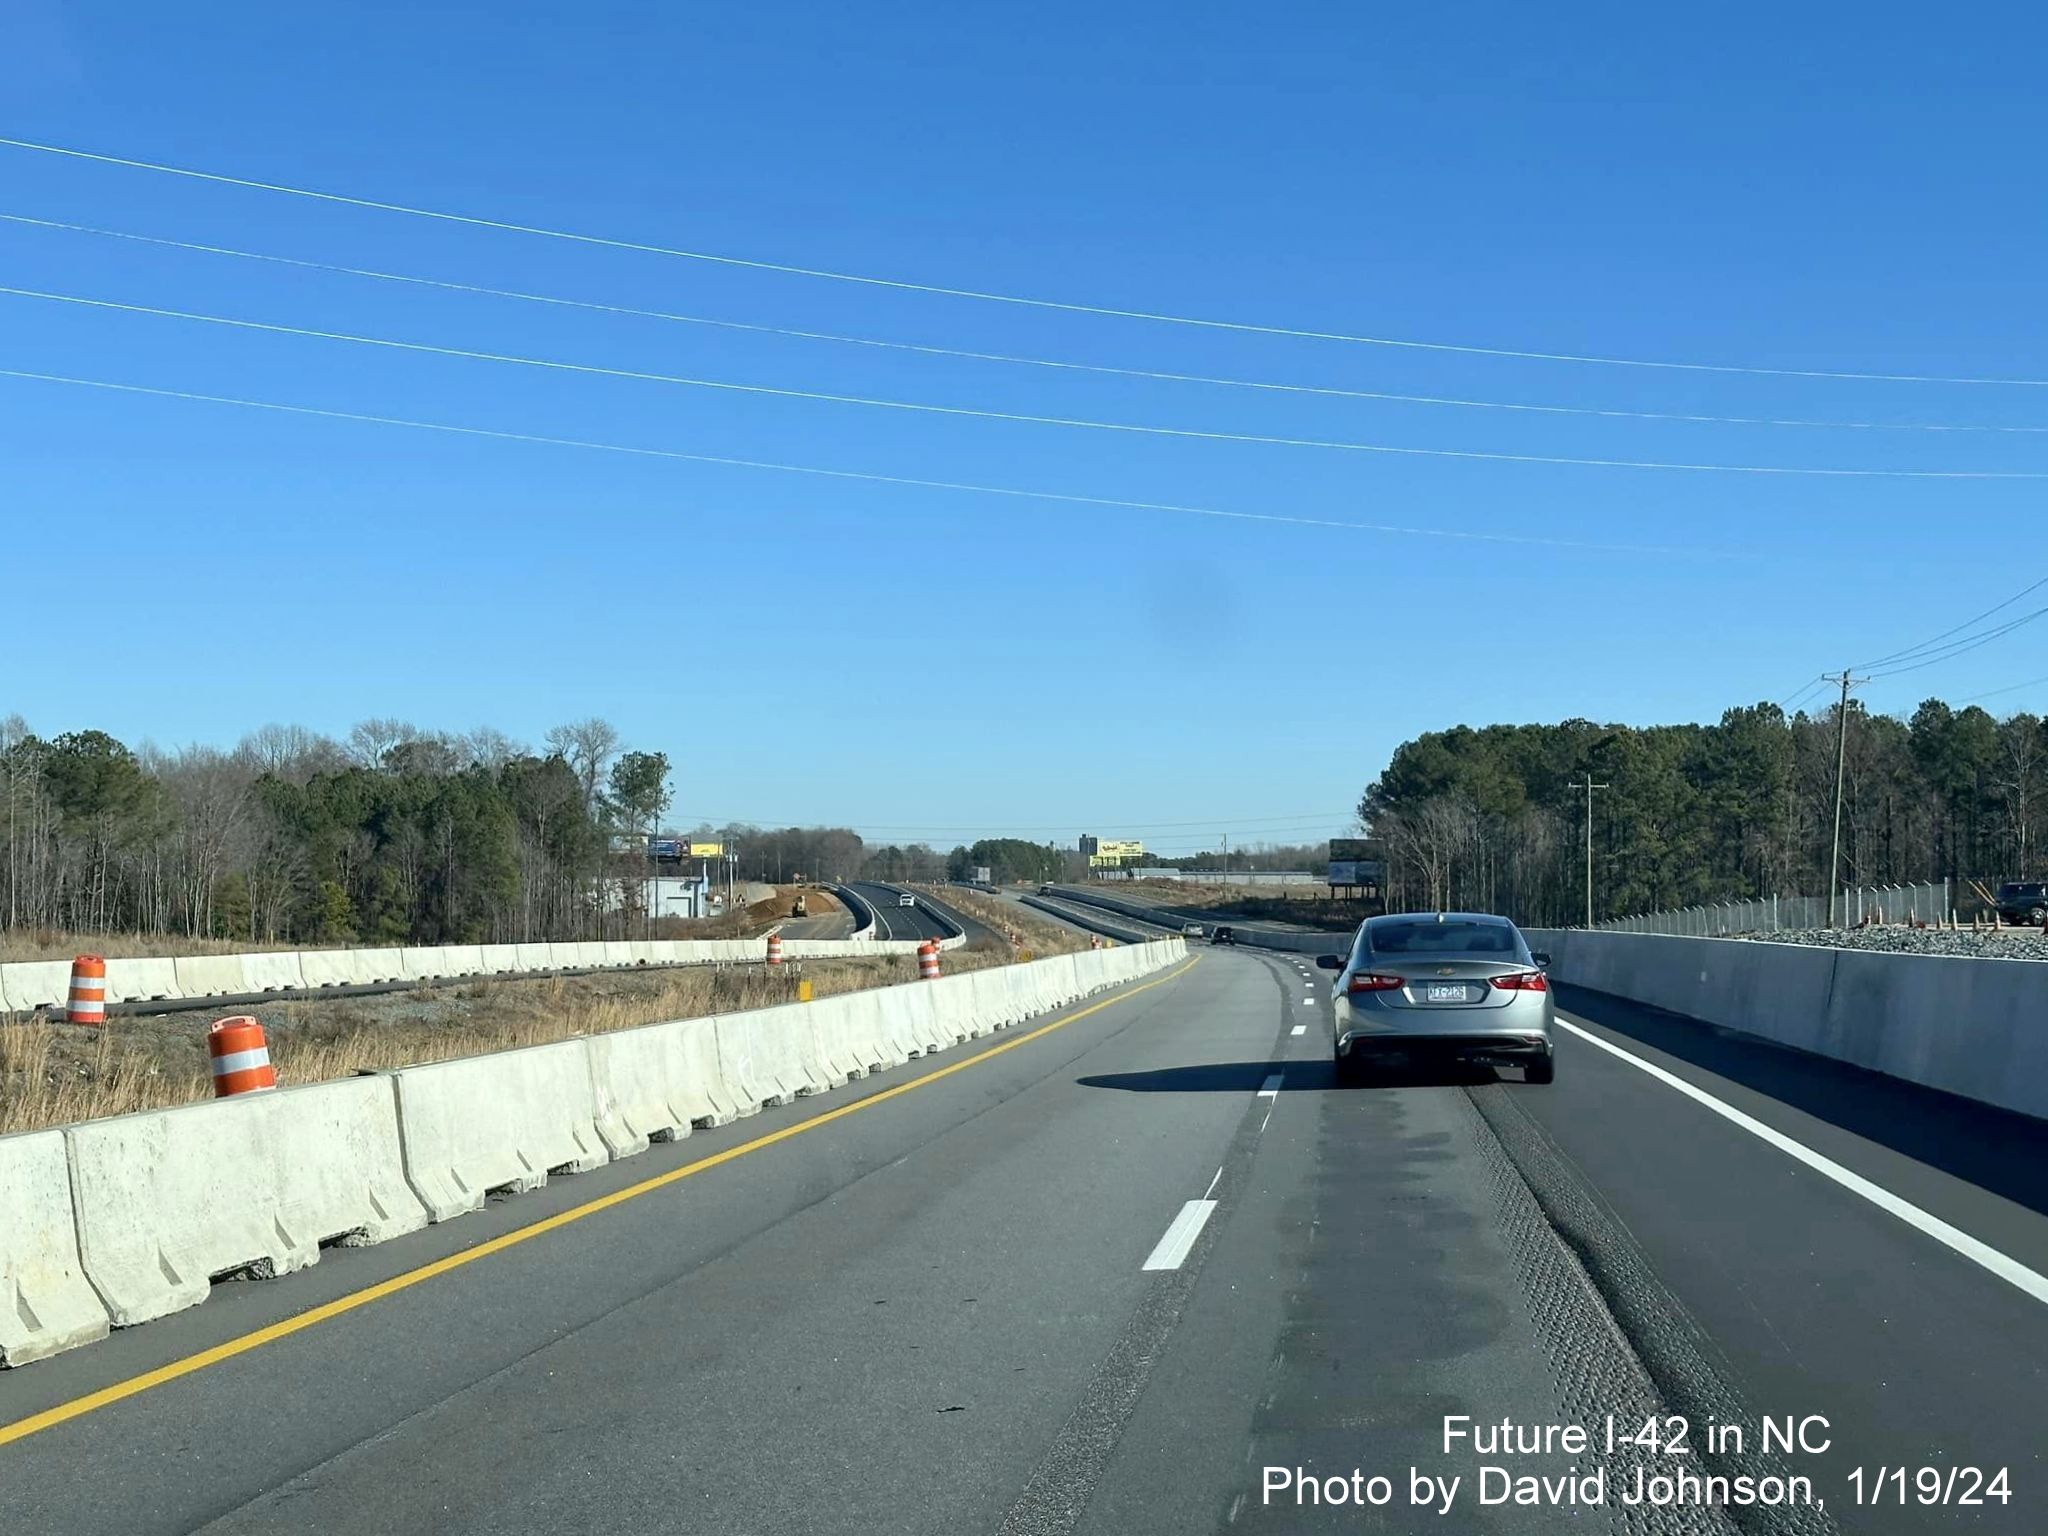 Image of traffic on US 70 (Future I-42) East at beginning of Johnston County work zone after Business 70 exit, photo by David Johnson, January 2024